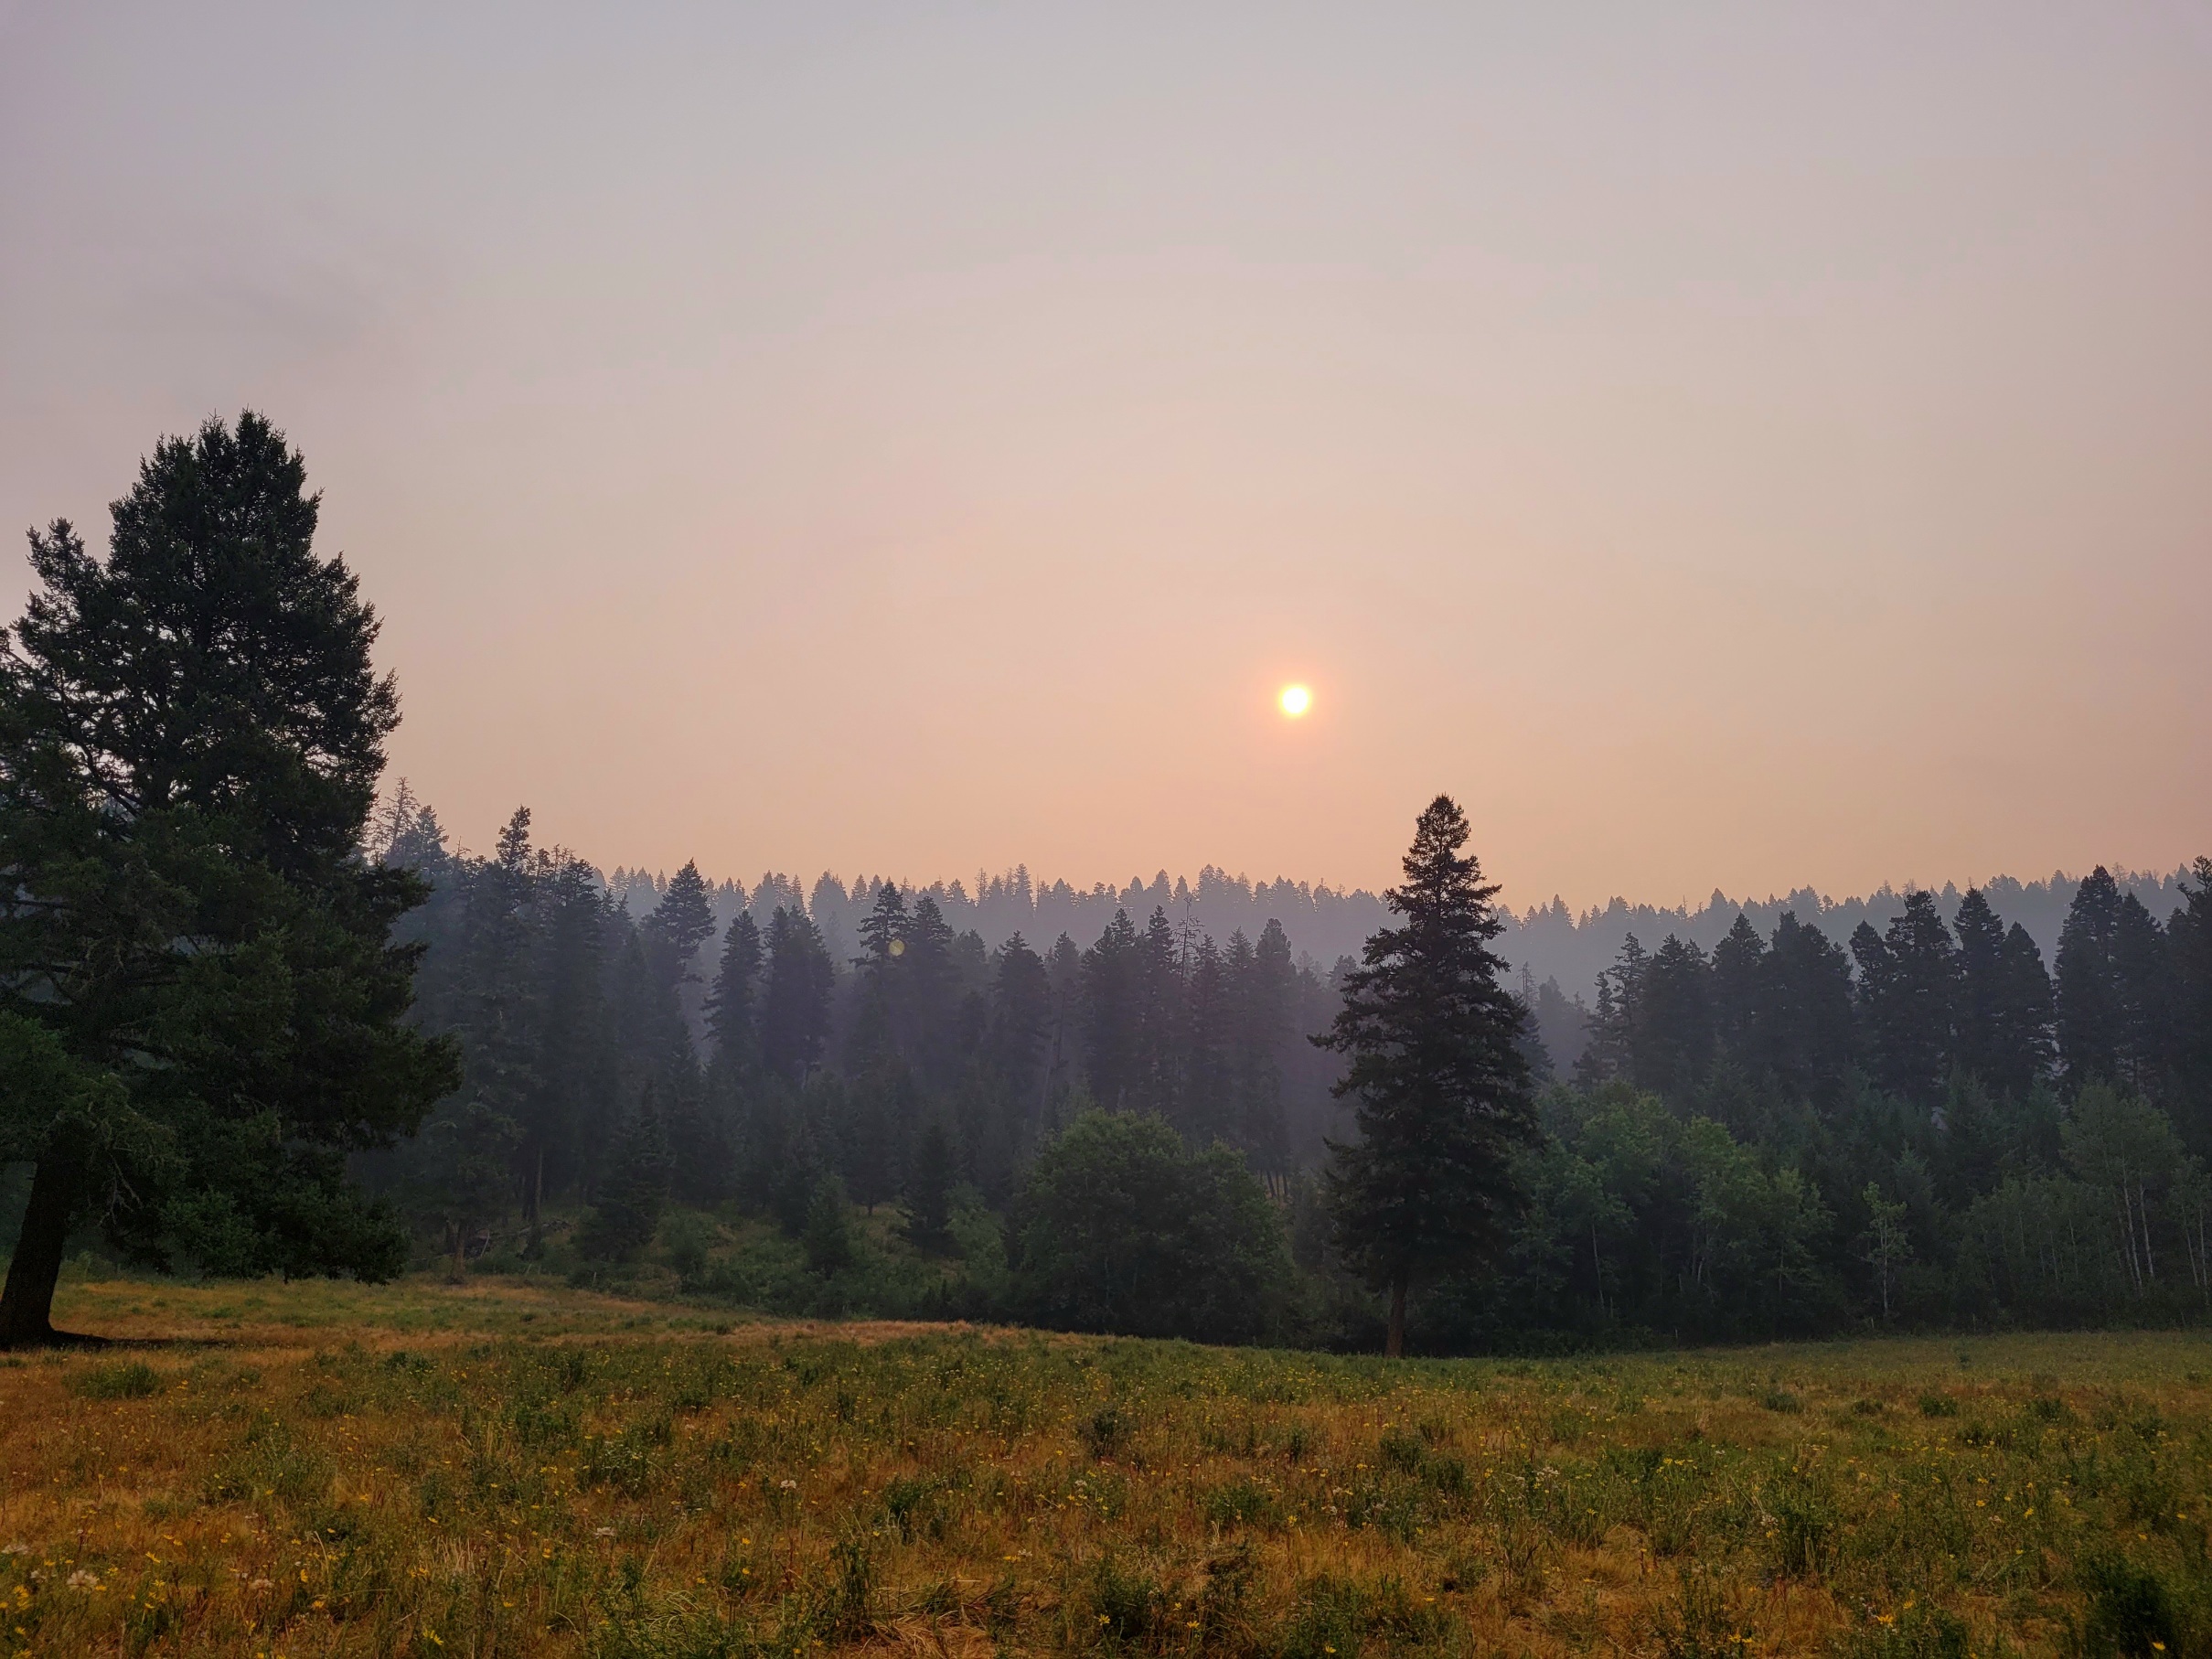 photo of a smoky orange-tinted sky over a line of trees in the distance